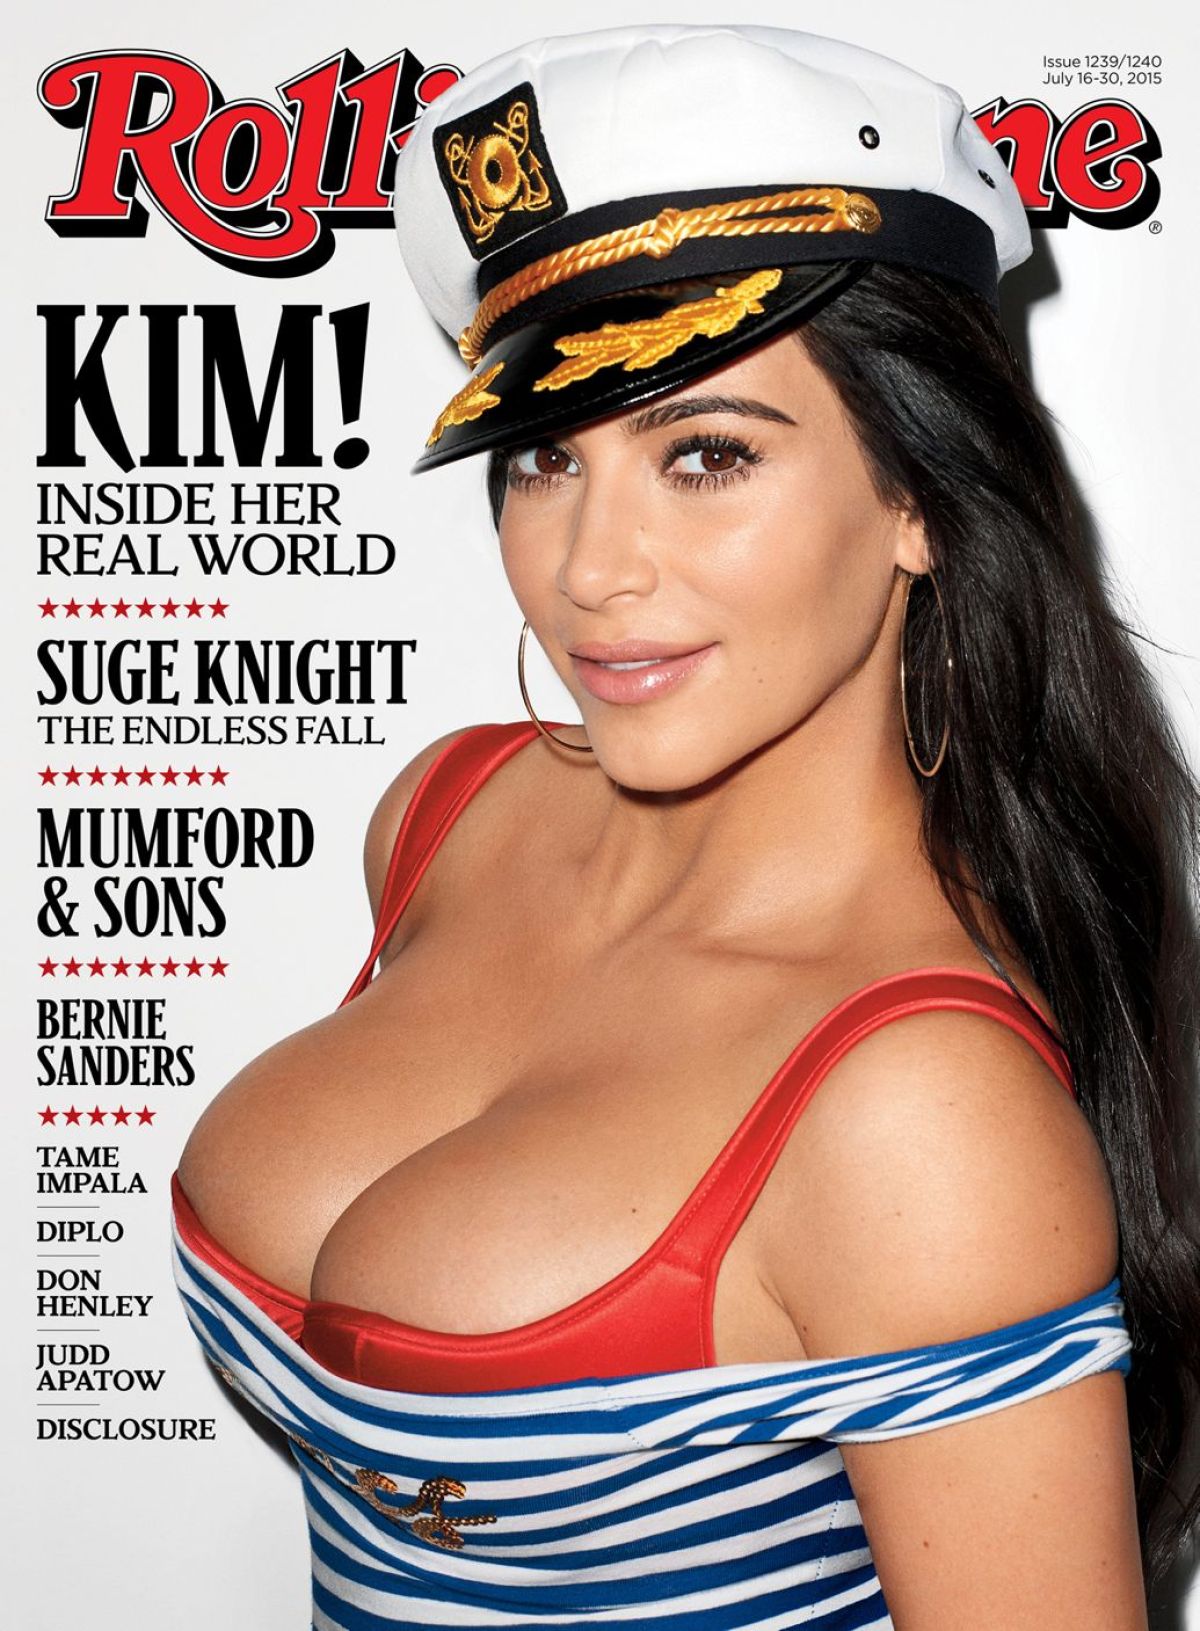 kim-rolling-stone-cover-1435761161